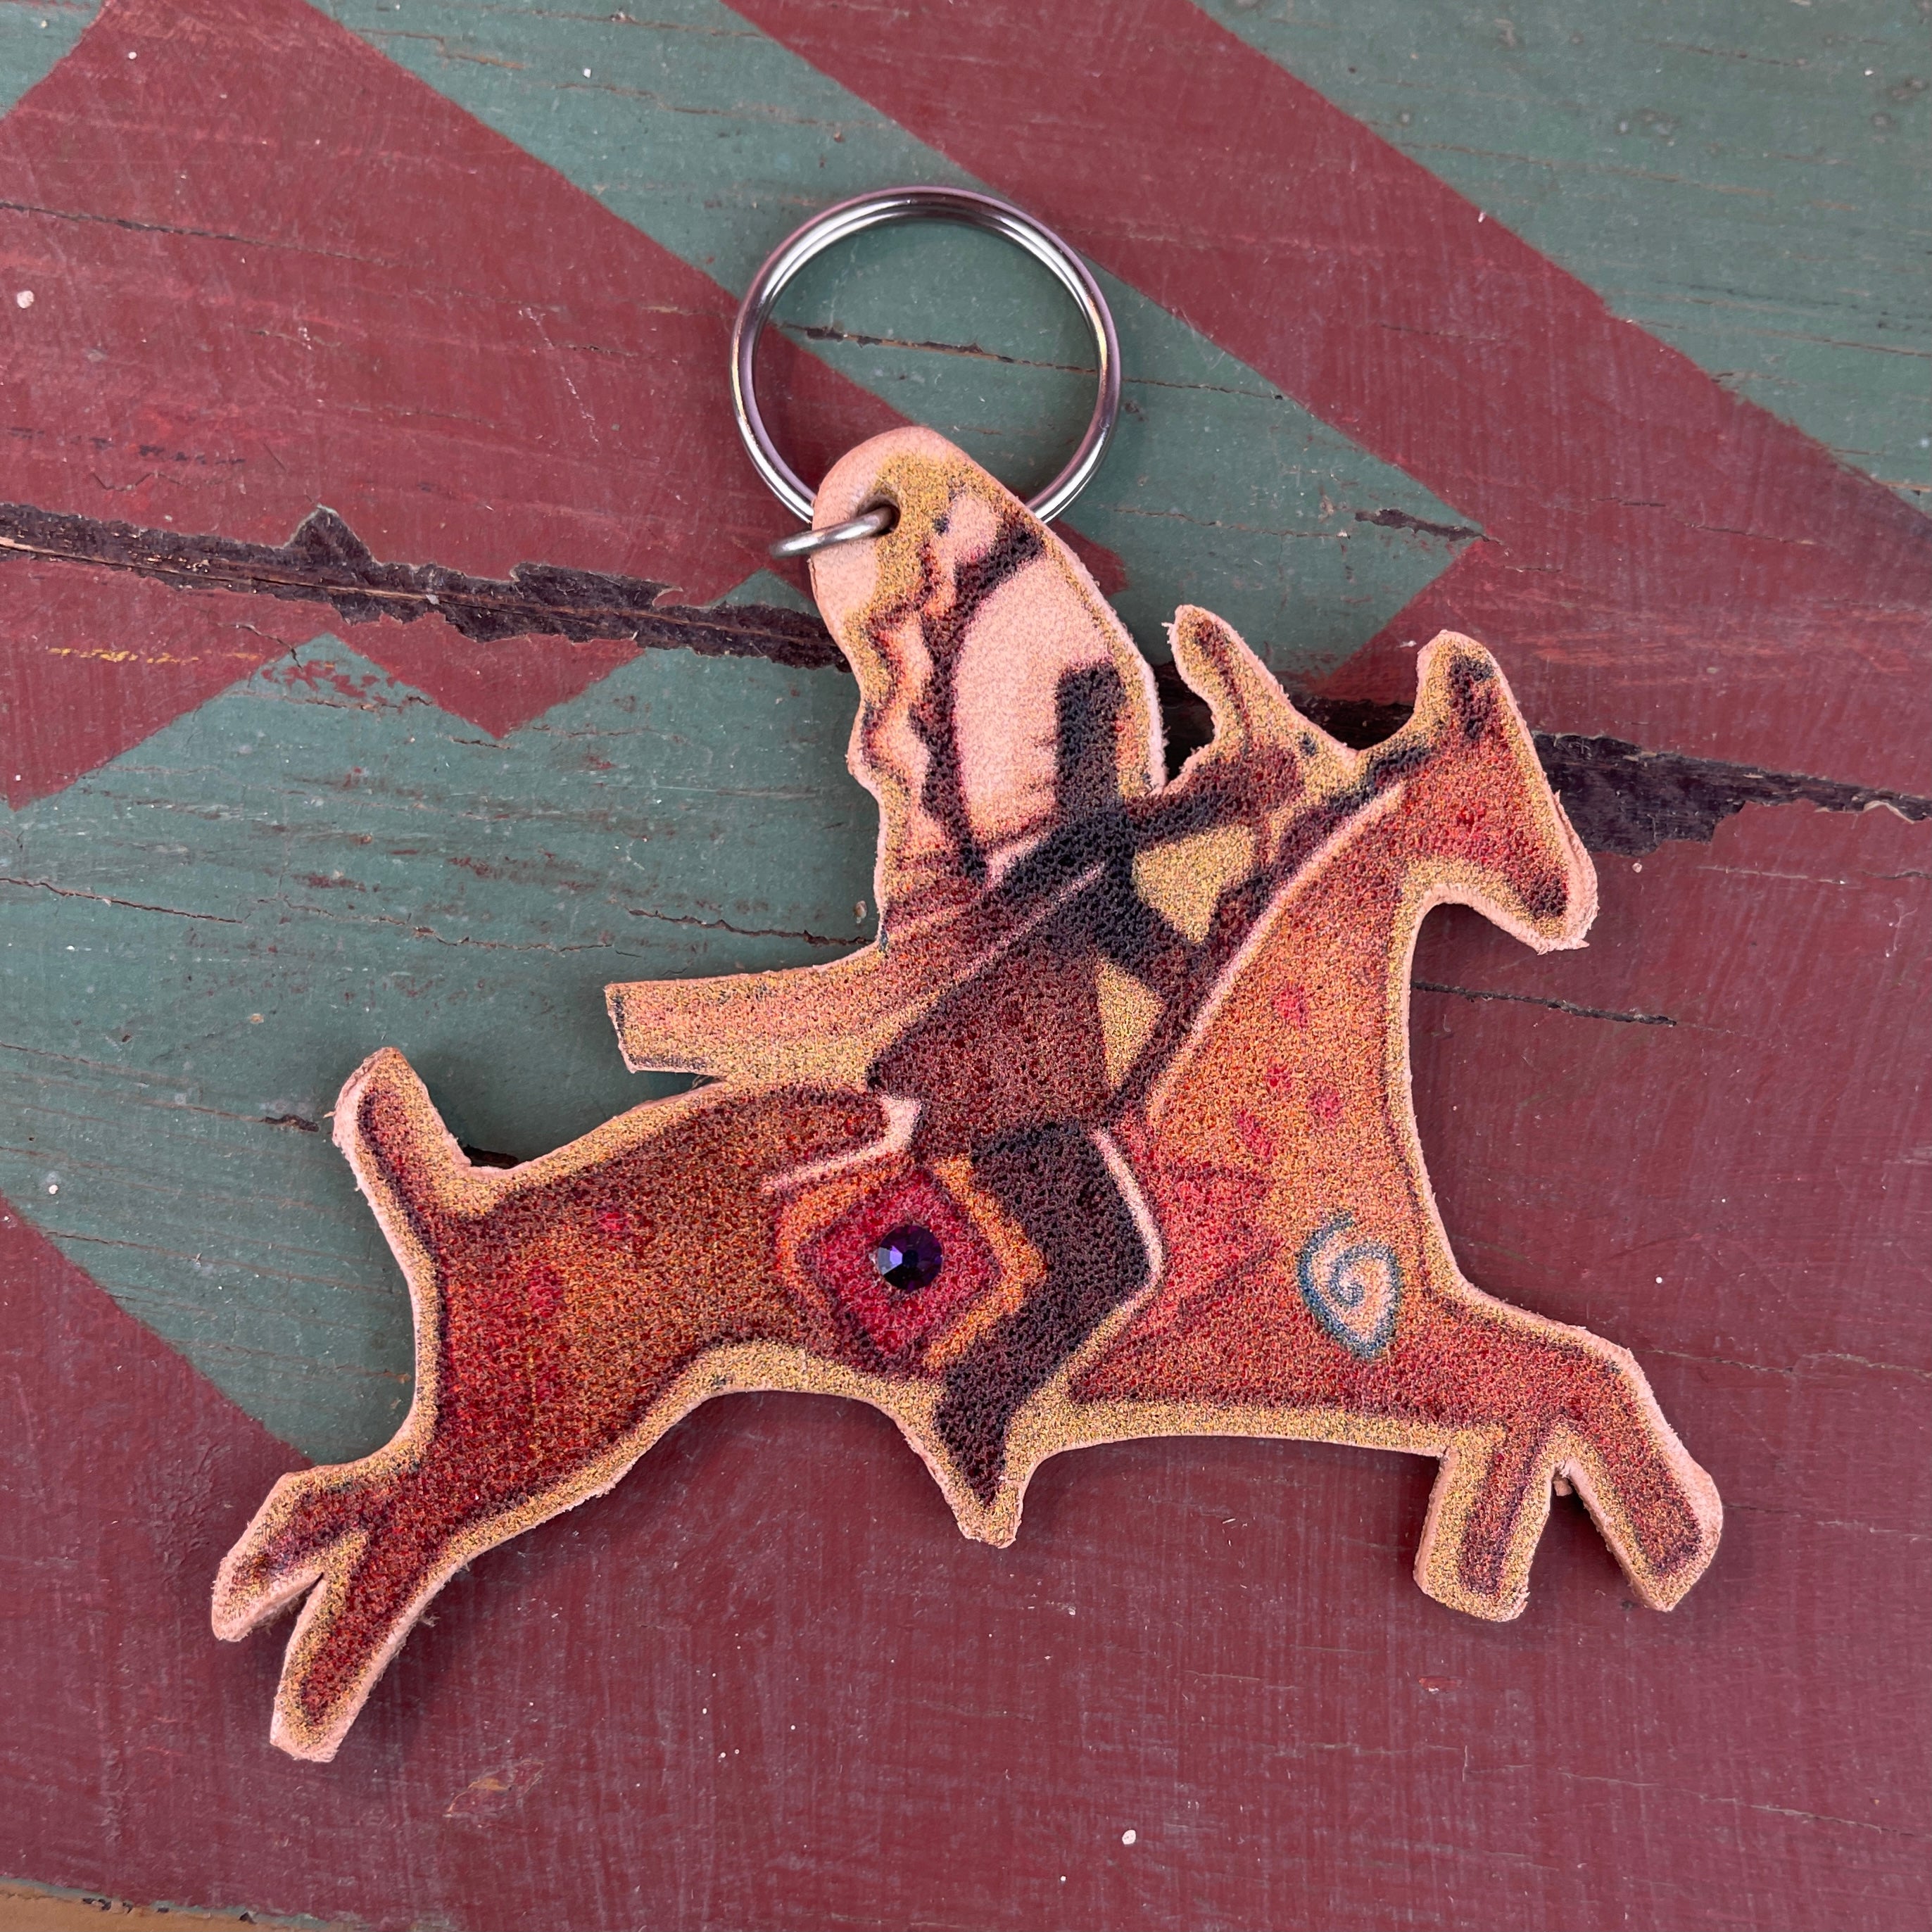 Indian Chief Leather Keychain